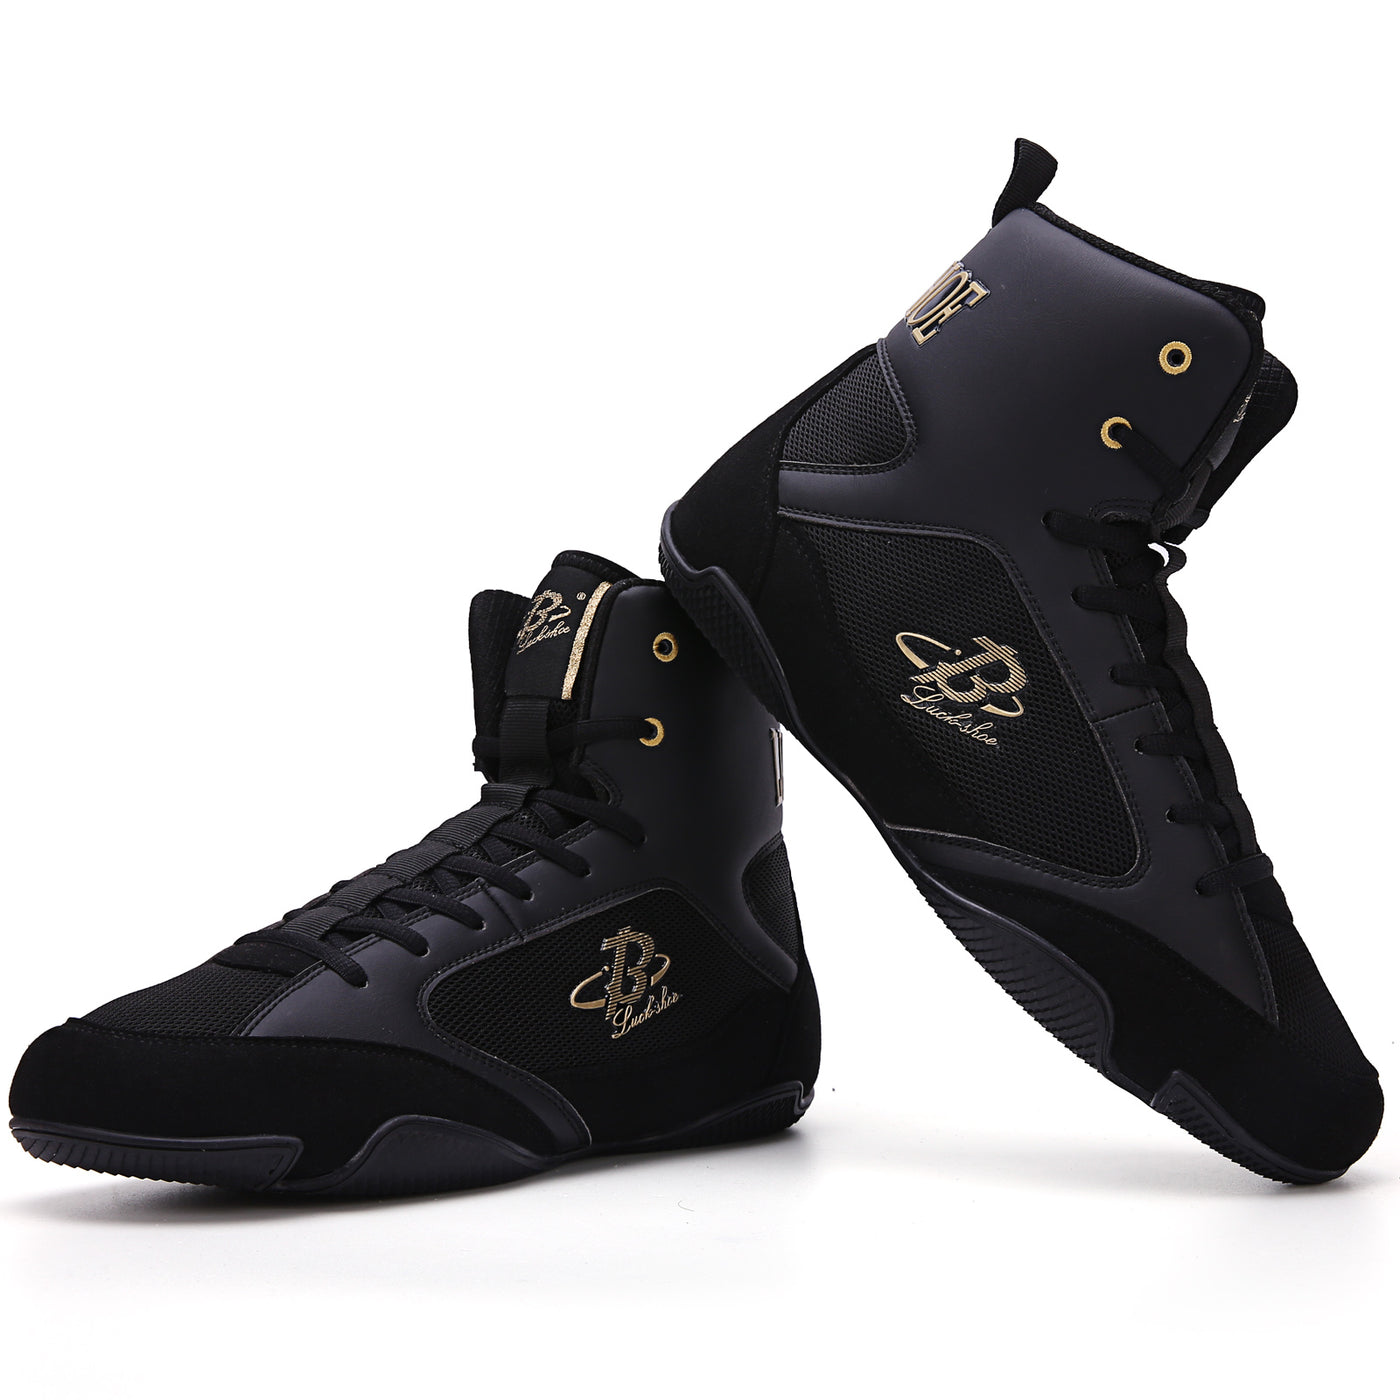 B LUCK SHOE Boxing Shoes, Unisex Boxing Boots Breathable Wrestling Sho